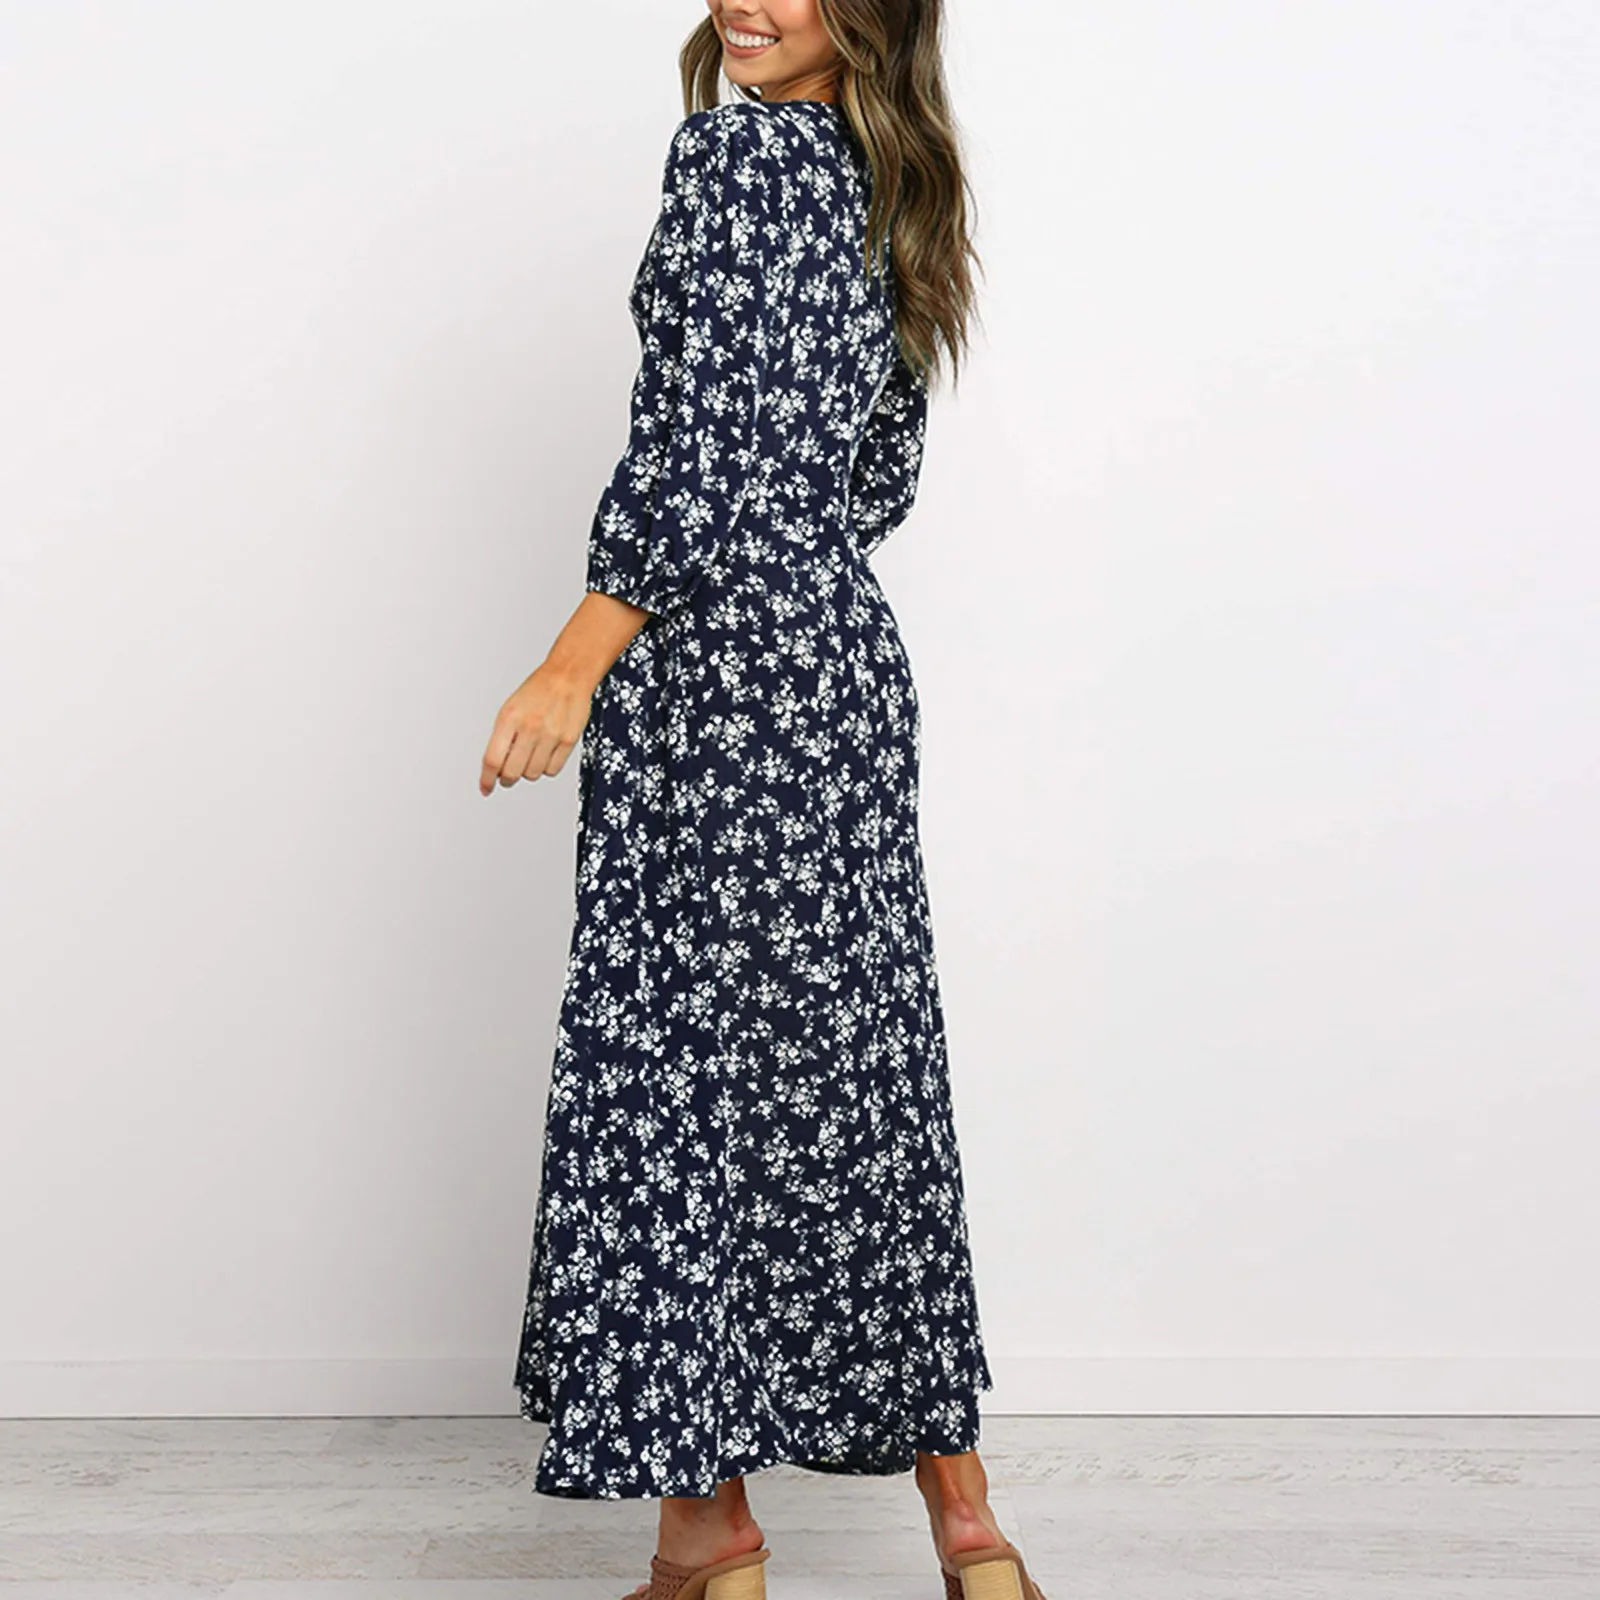 Women Floral V Neck Maxi Dress Spring Fall Ladies Long Puff Sleeve Flared Dress Fashion Female Buttons Swing Dress A-Line